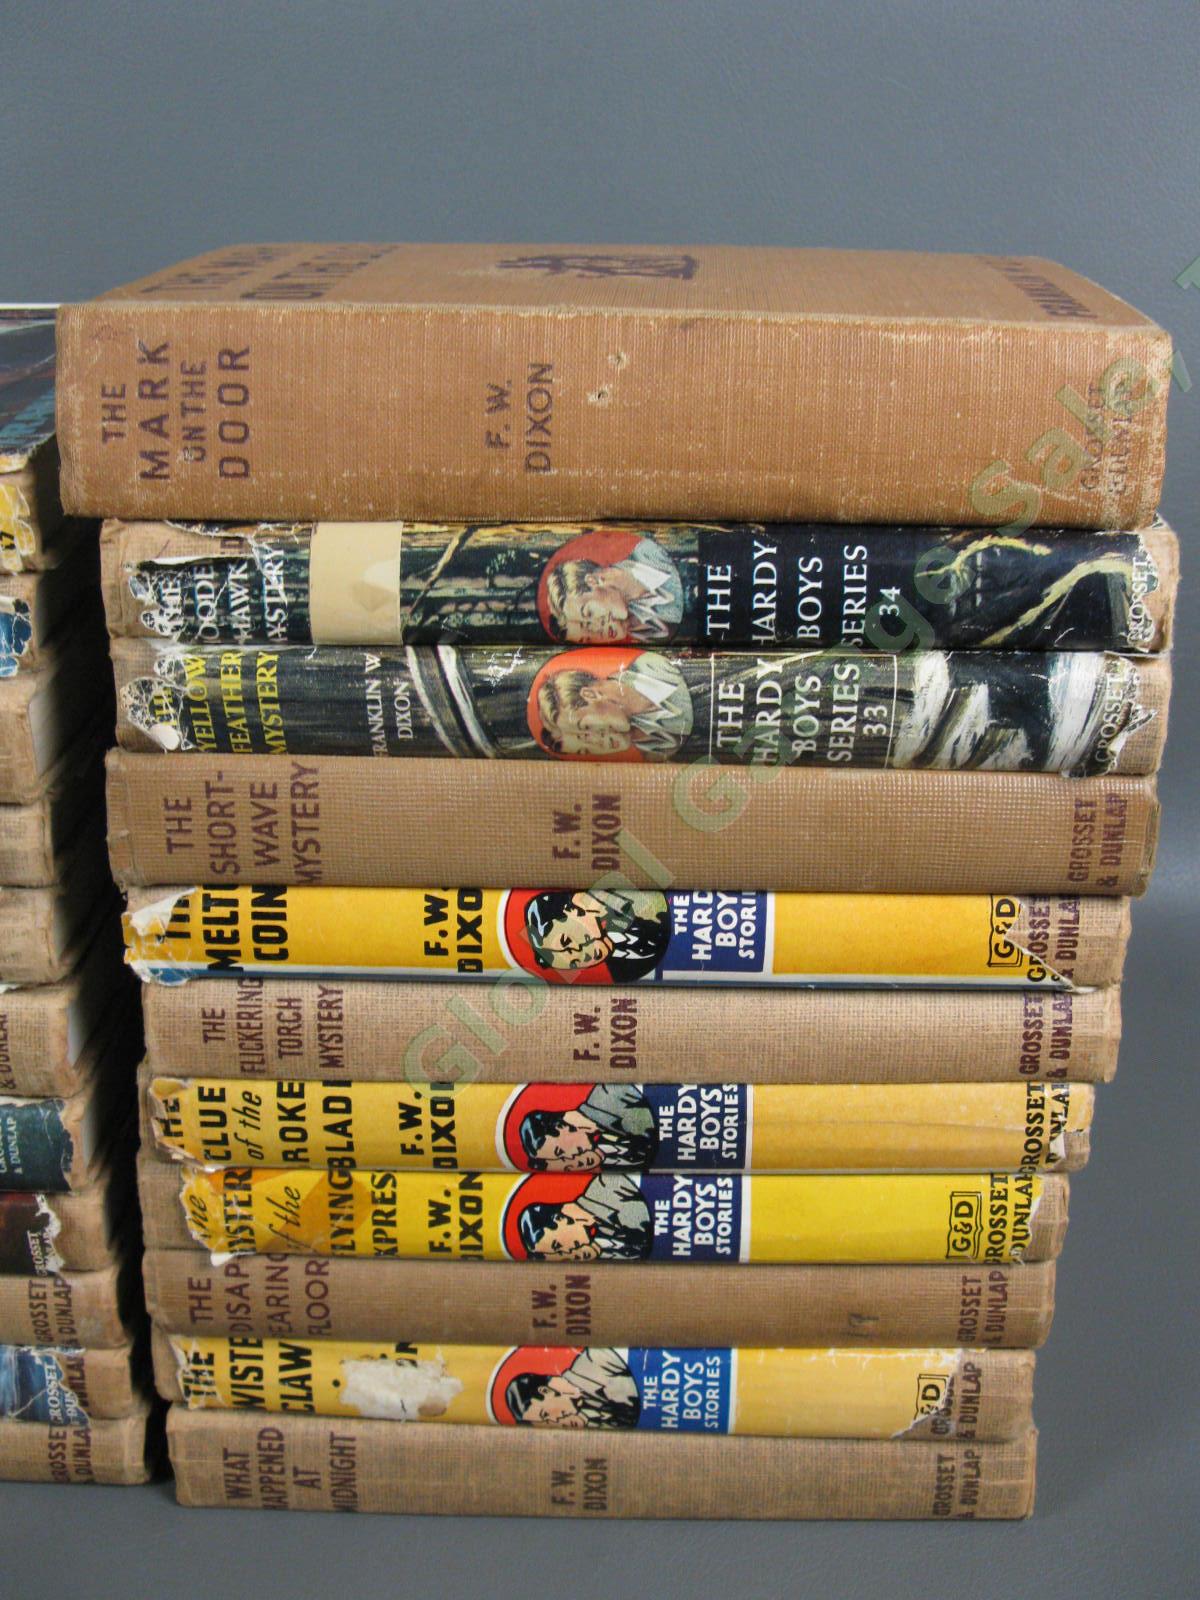 22 VINTAGE Hardy Boys Mystery Brown Hardcover Book Collection Set 1931-1960s LOT 2